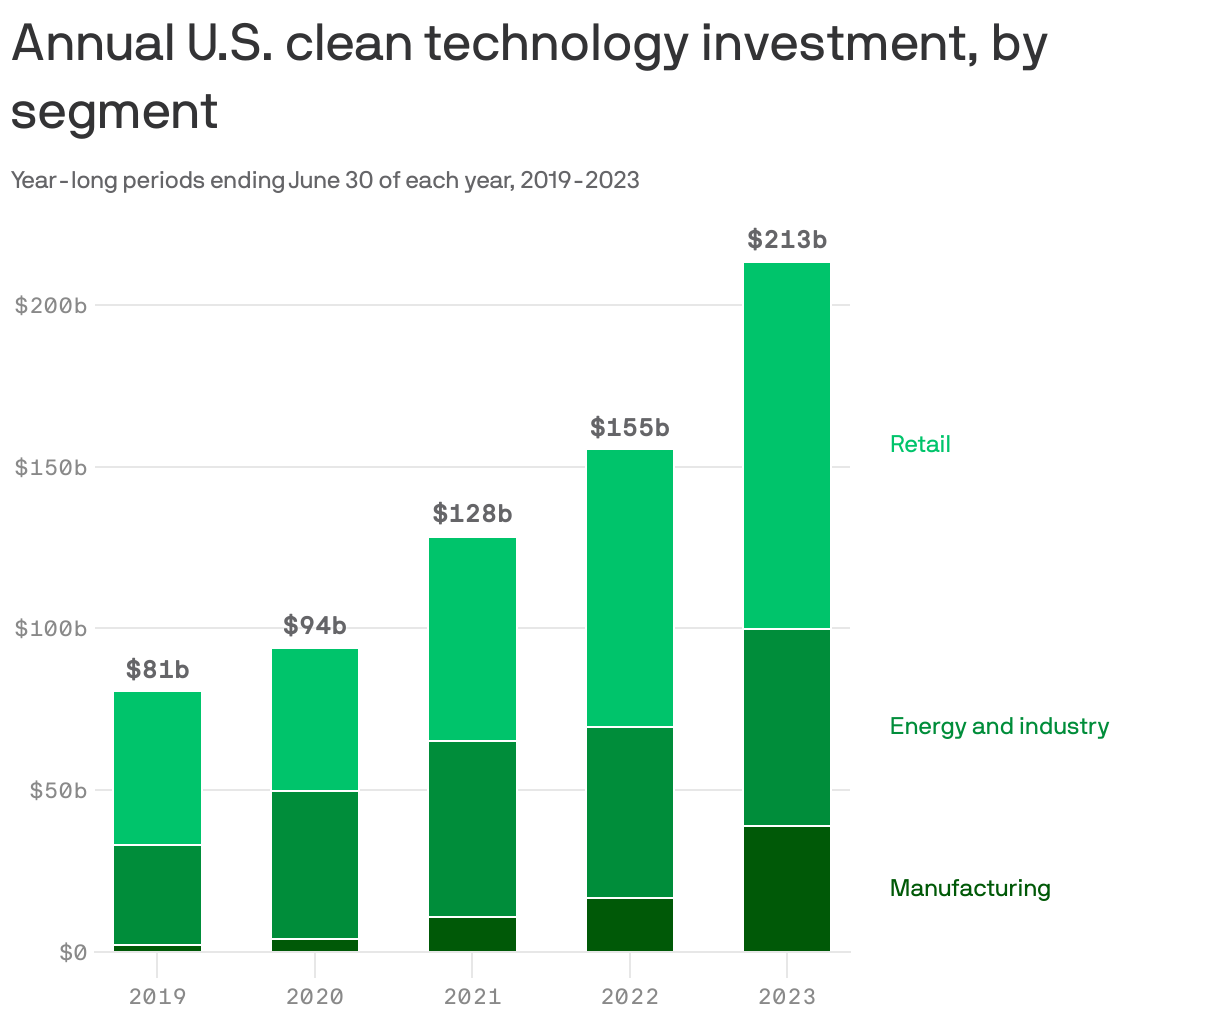 Annual U.S. clean technology investment, by segment